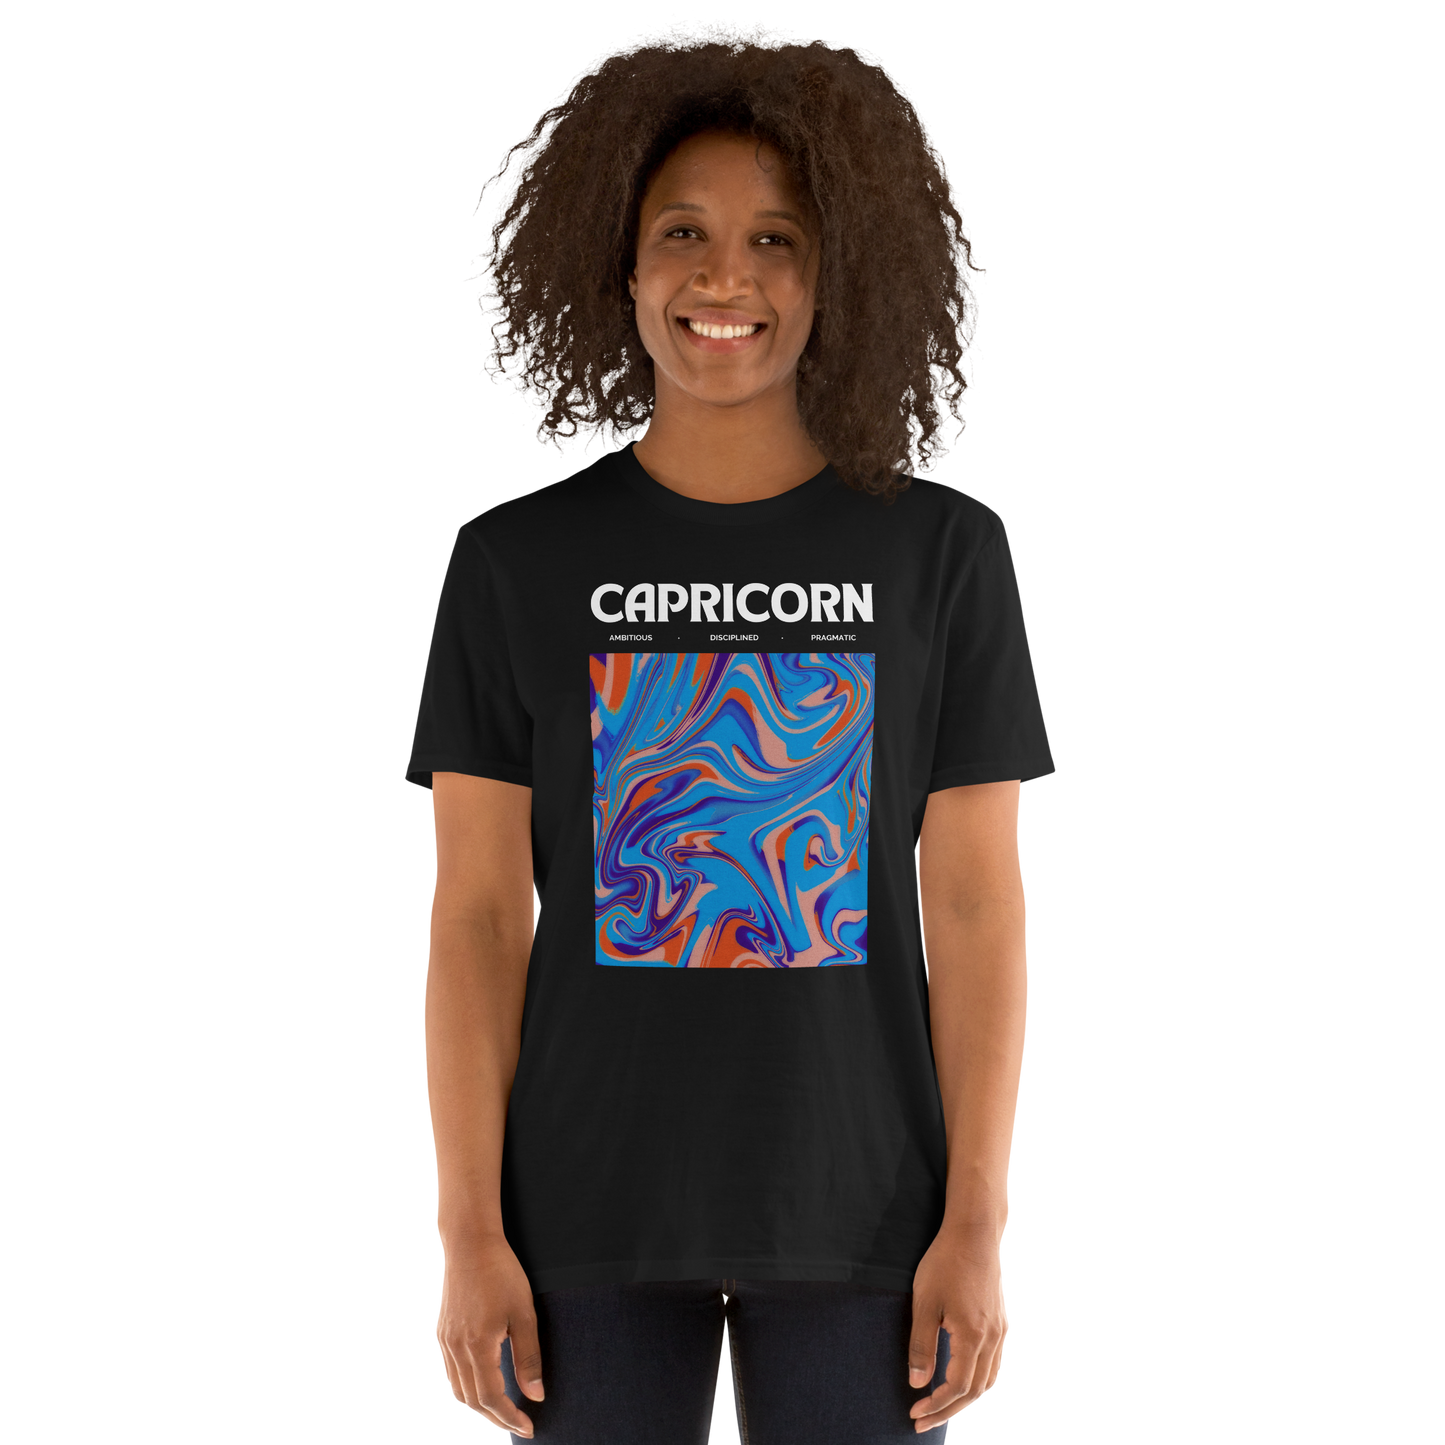 Smiling woman wearing a Black Capricorn T-Shirt featuring an Abstract Capricorn Star Sign graphic on the chest - Cool Graphic Zodiac T-Shirts - Boozy Fox